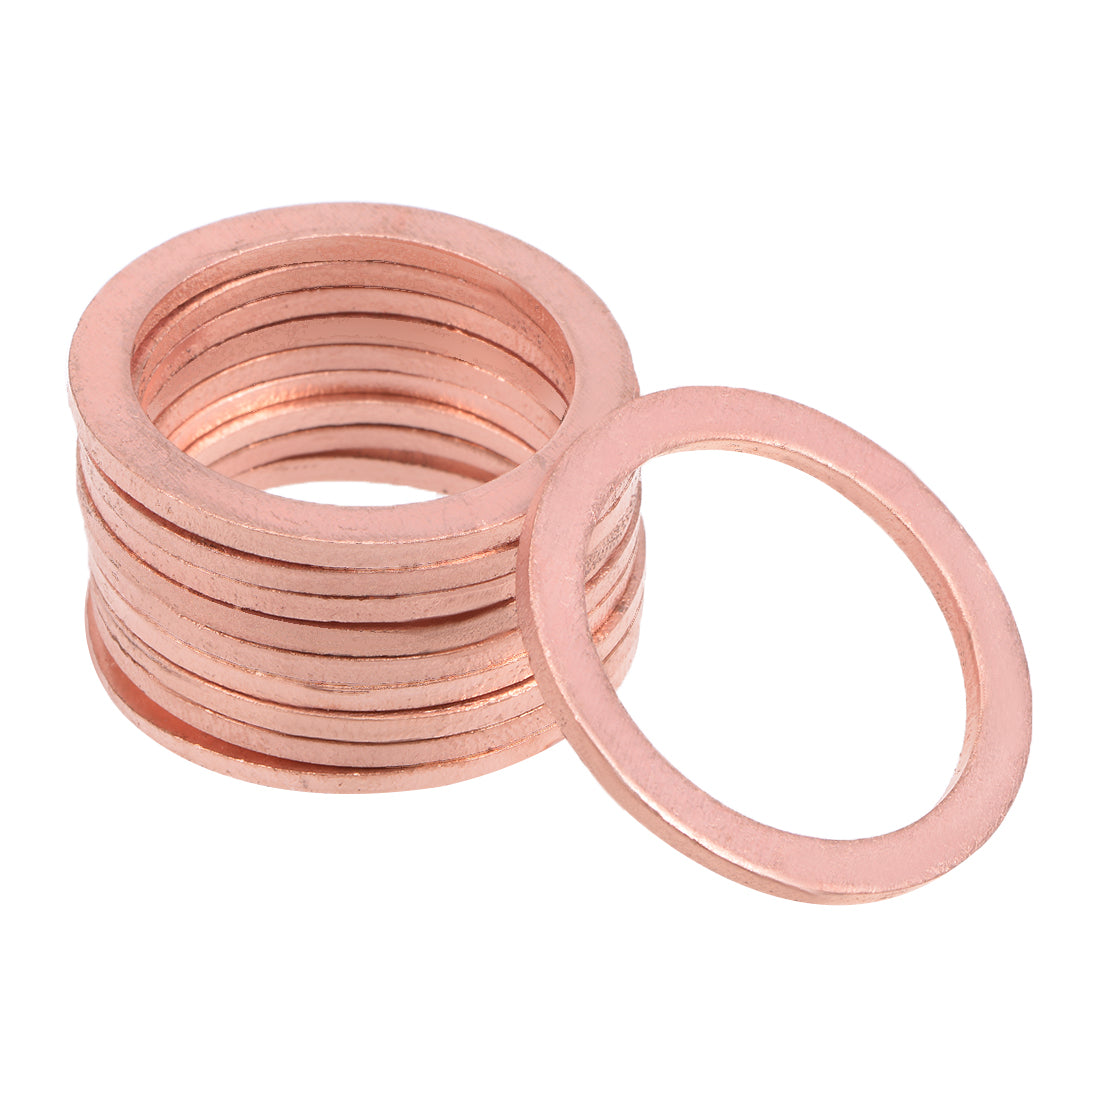 uxcell Uxcell 10Pcs 20mm x 26mm x 1.5mm Copper Flat Washer for Screw Bolt